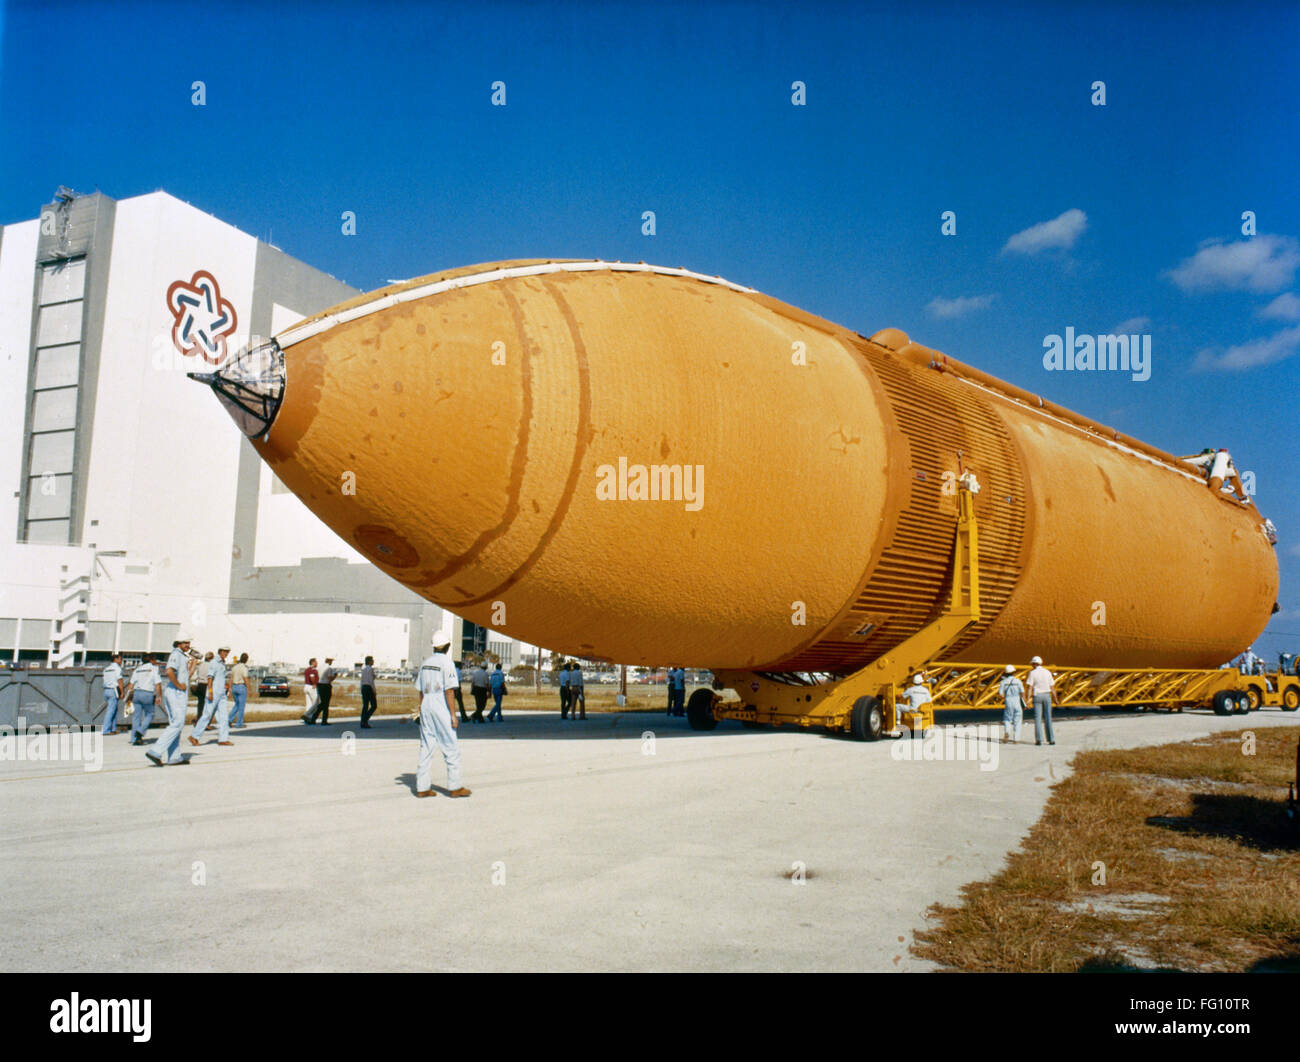 SPACE SHUTTLE: FUEL TANK. /nA Space Shuttle external fuel tank arriving at Kennedy Space Center in Florida. Photograph, c1998. Stock Photo